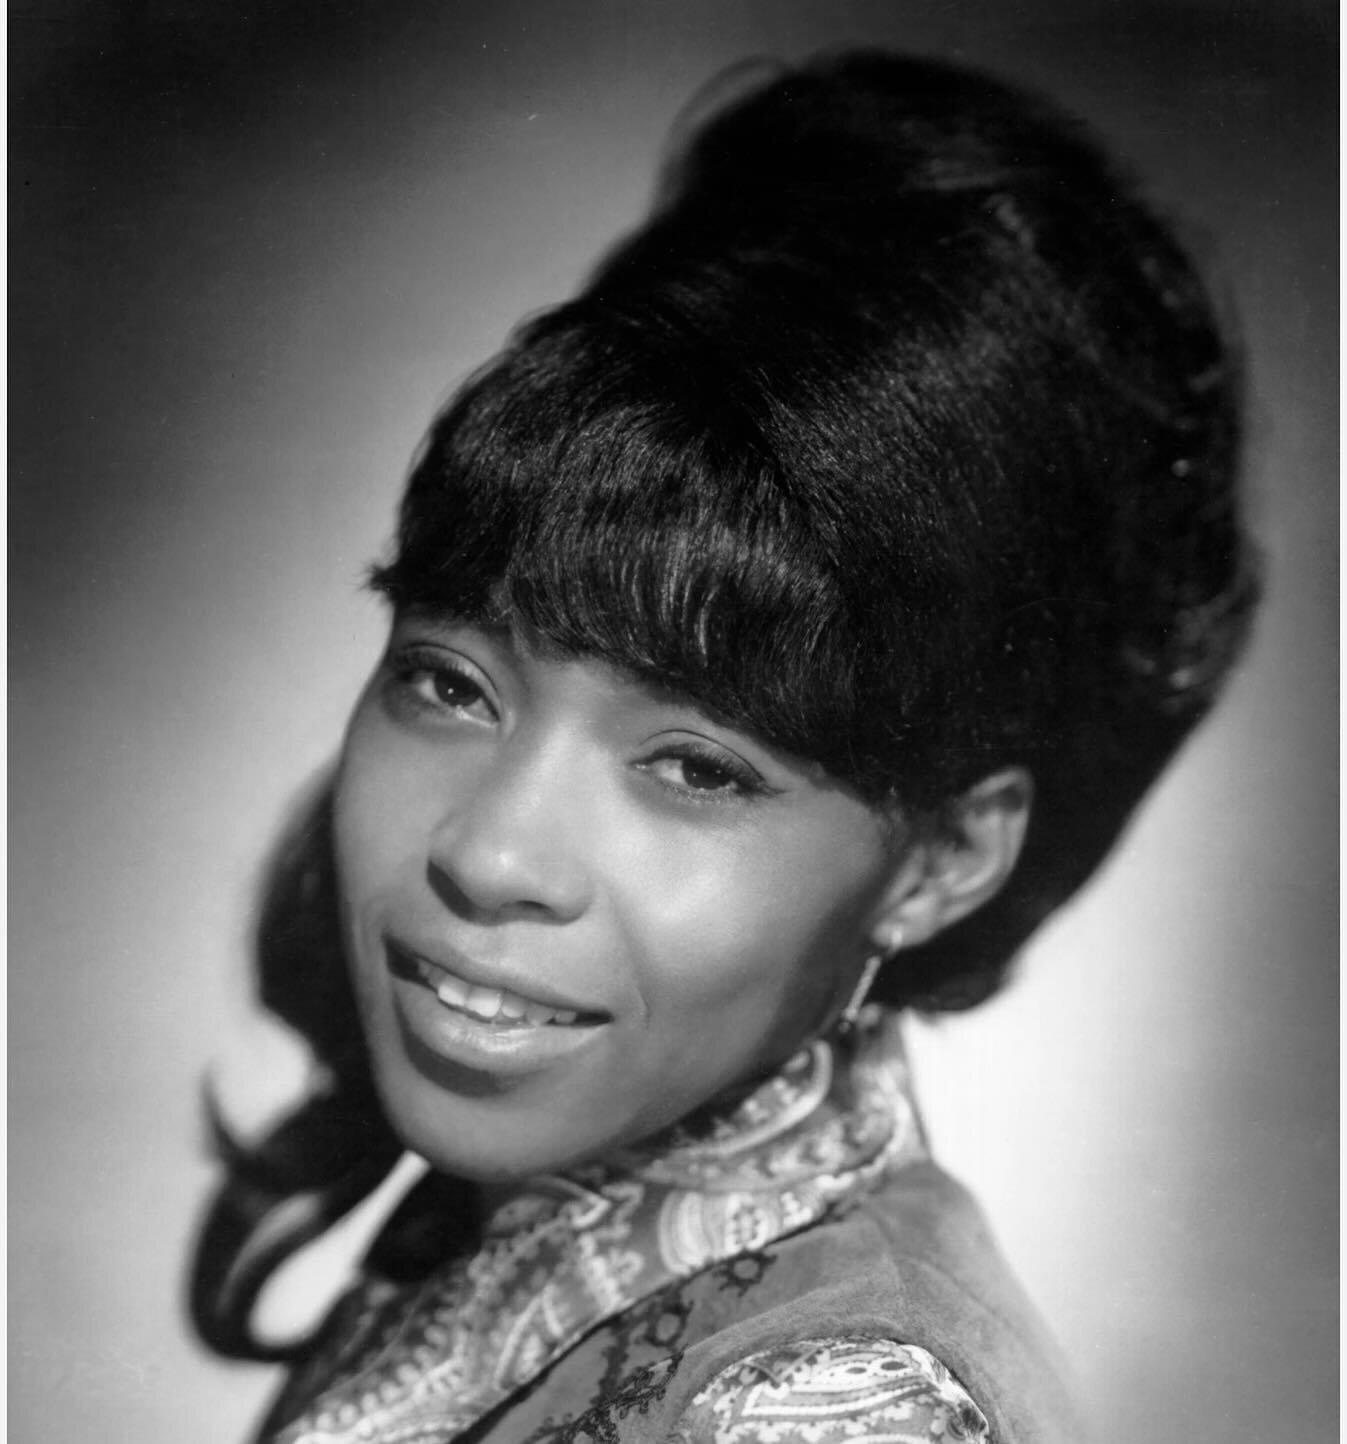 We Ain&rsquo;t New To This!
Linda Martell

&ldquo;A pioneering force hailed as the unsung hero of the genre, Linda Martell (82), was the first commercially successful Black female artist in country music. Martell had the highest peaking single on the